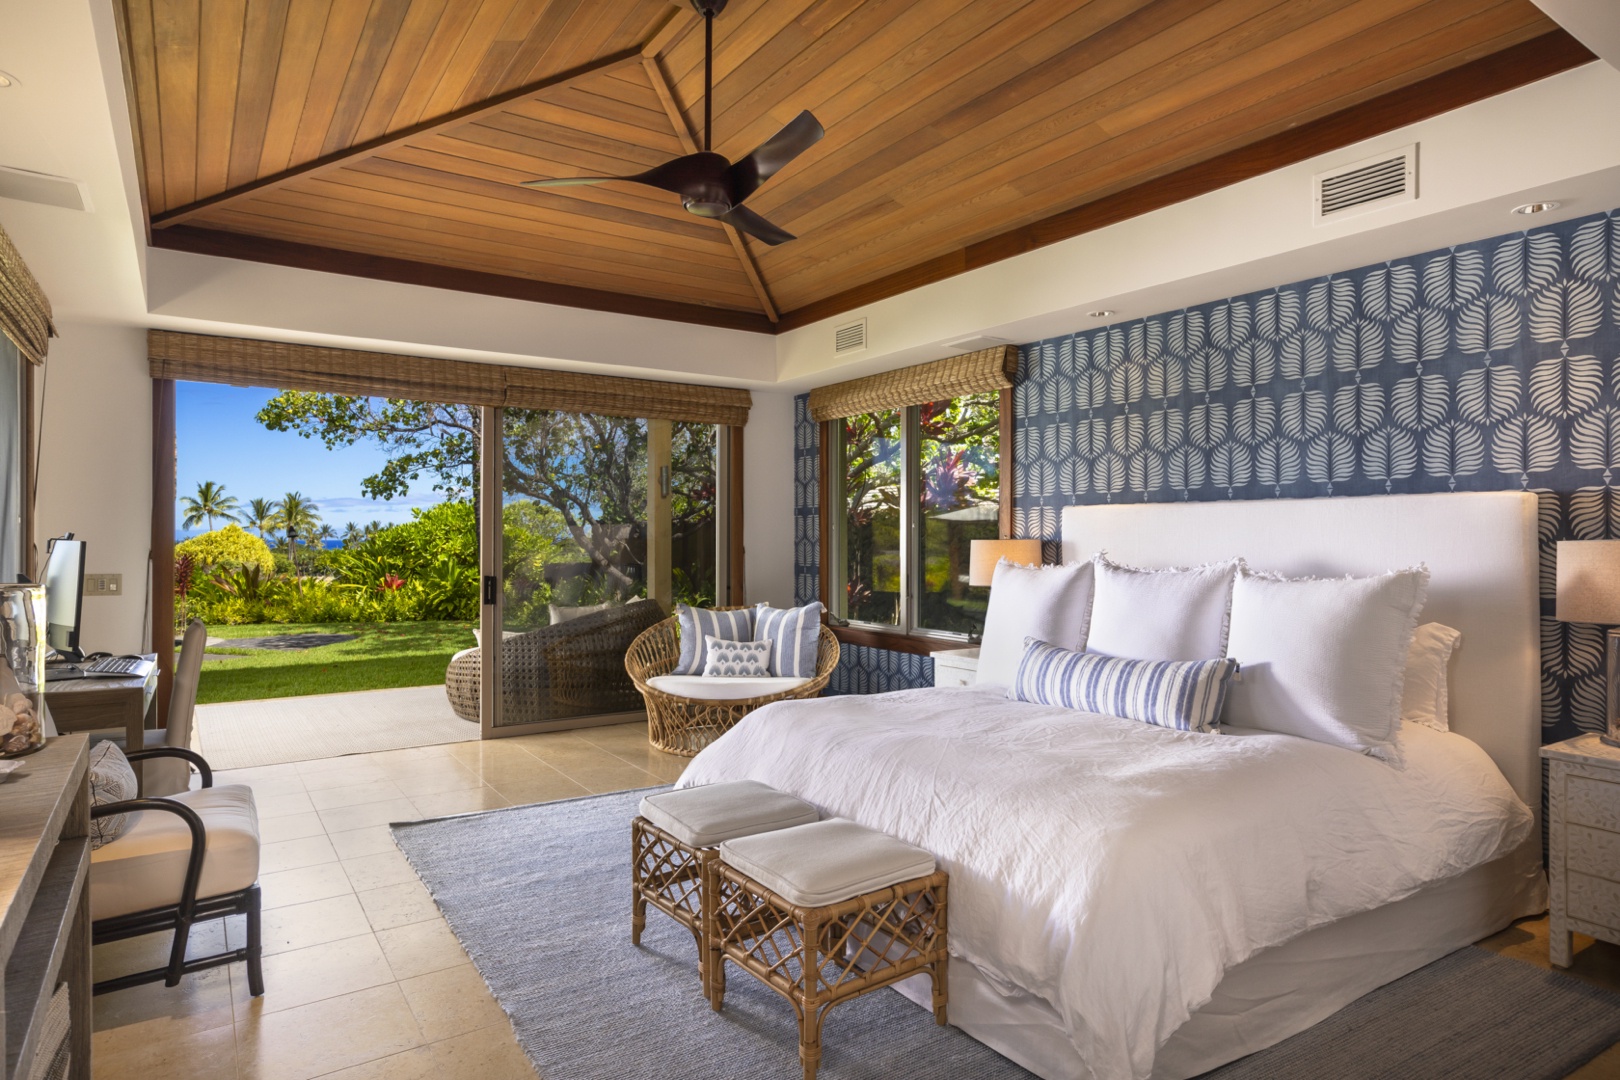 Kailua Kona Vacation Rentals, 4BD Kahikole Street (218) Estate Home at Four Seasons Resort at Hualalai - Primary bedroom suite with king bed, indoor sitting area, exclusive lanai & en suite bath